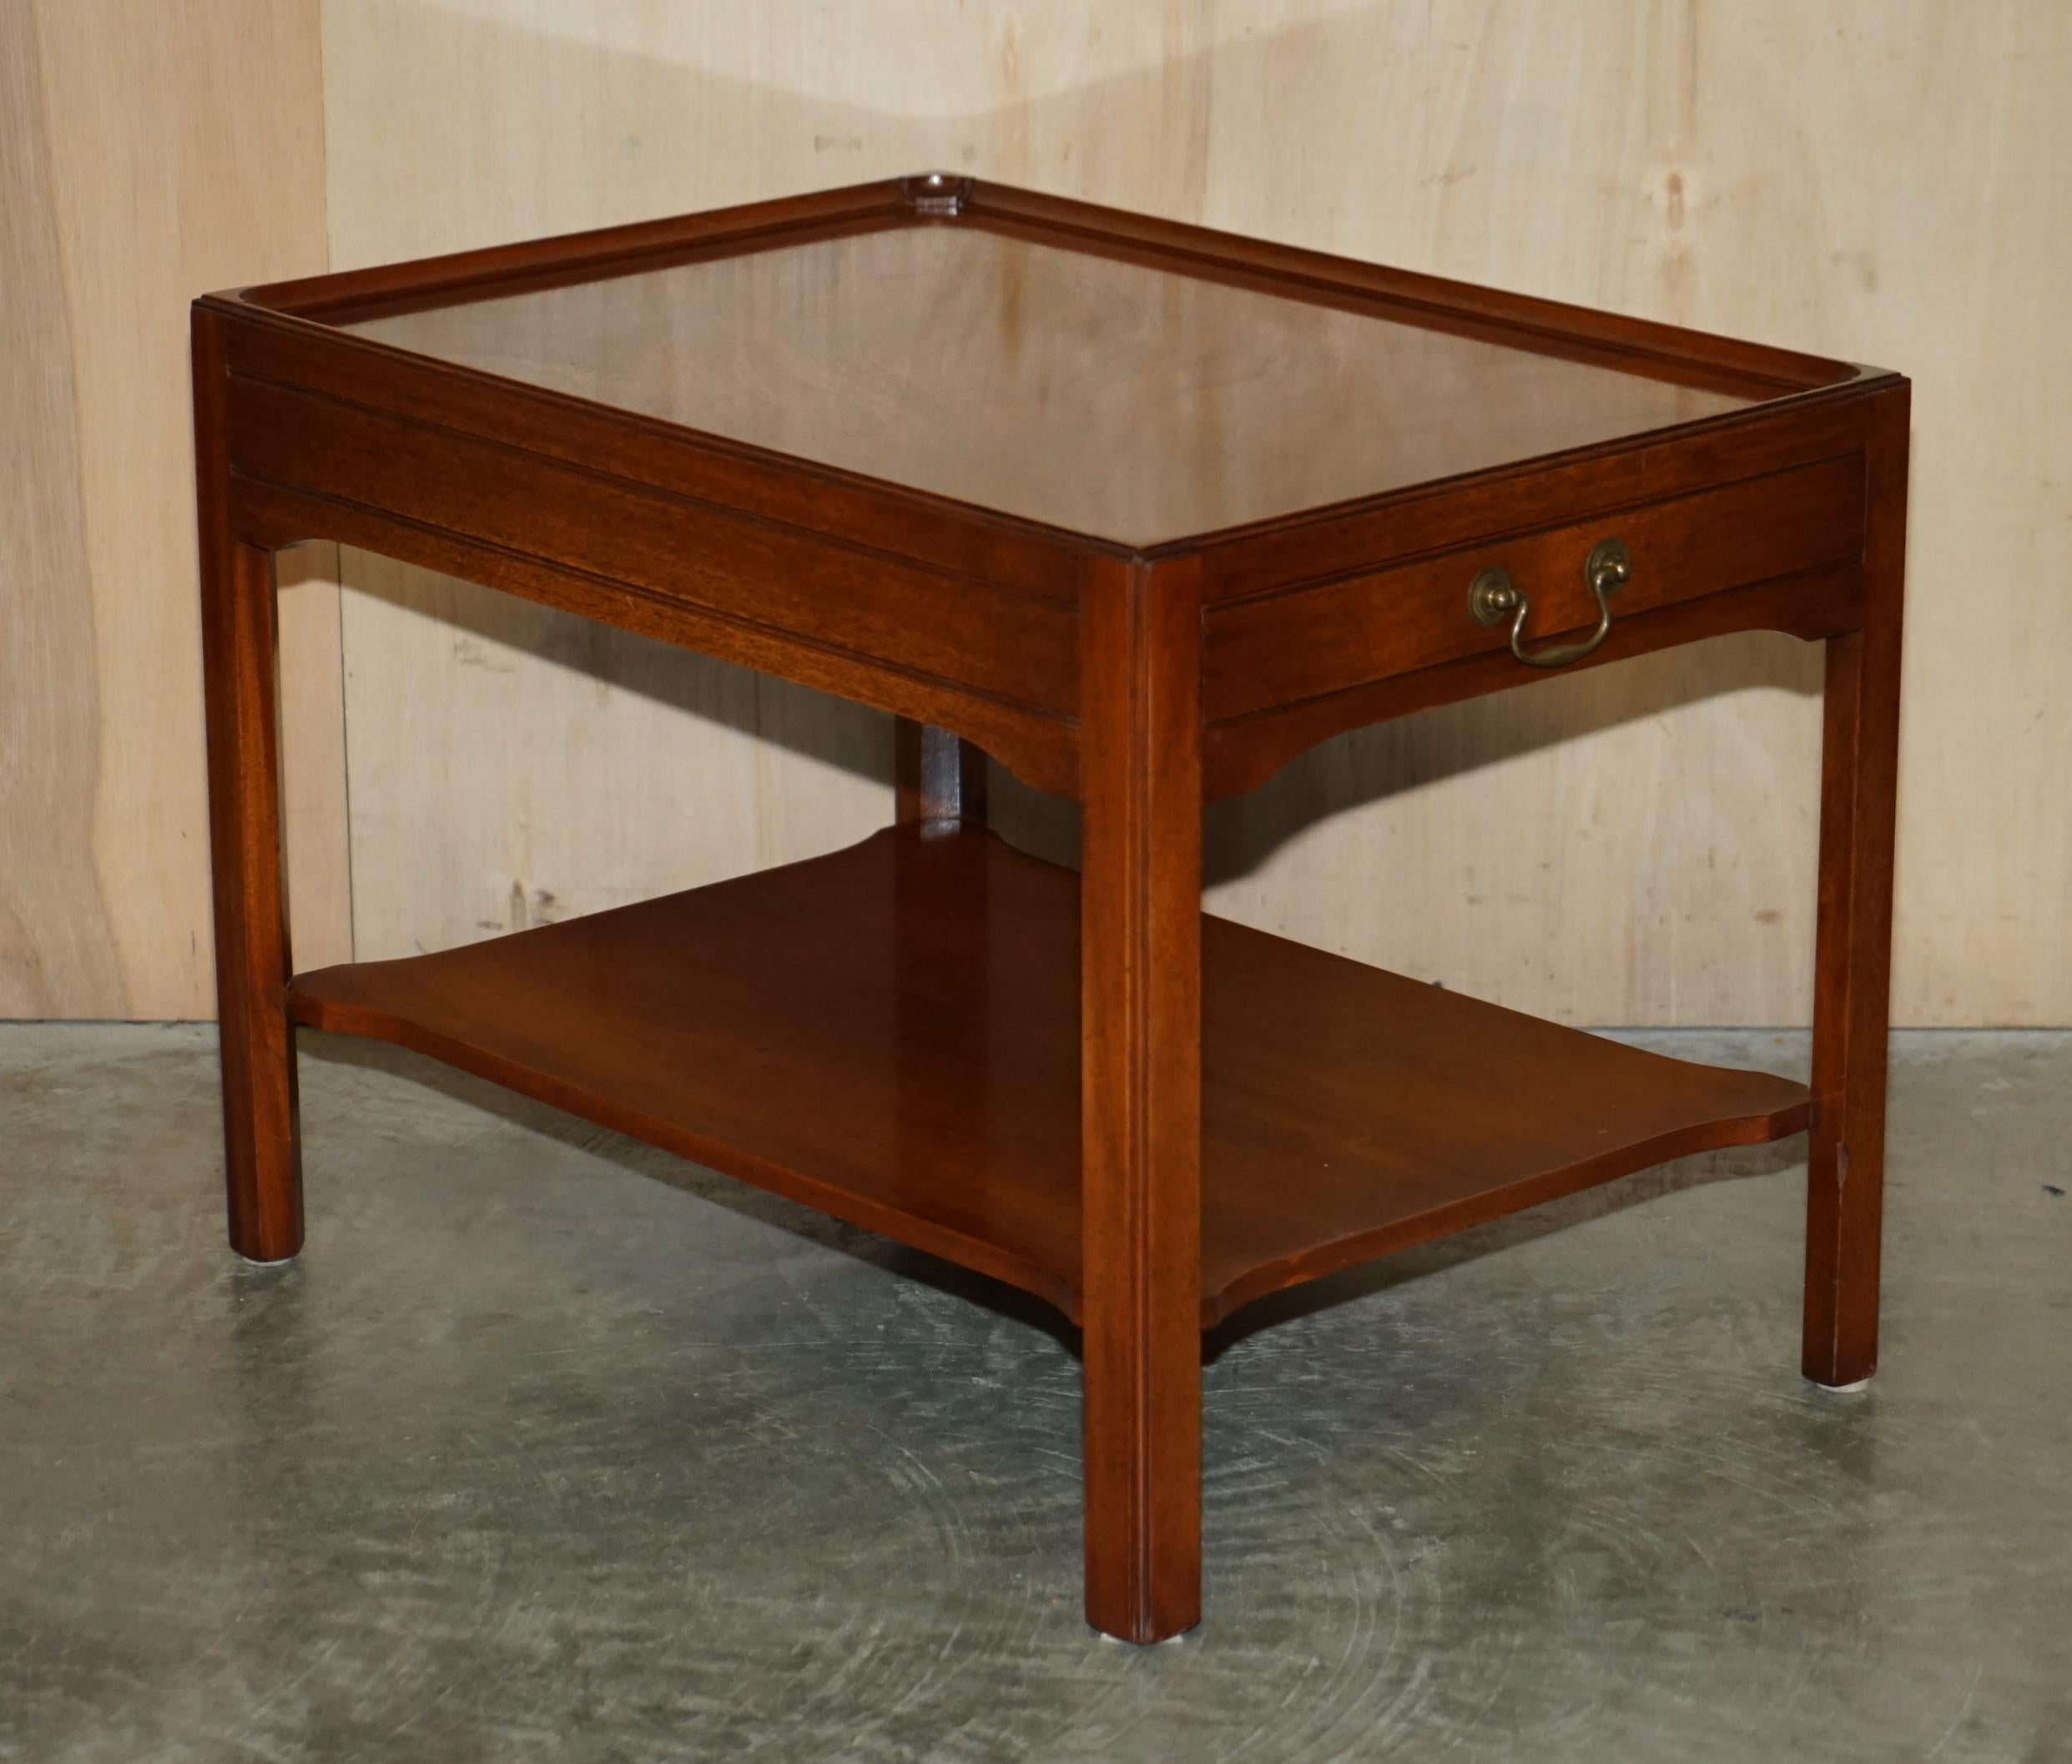 We are delighted to offer for sale this lovely pair of long Flamed Mahogany side end lamp wine tables with large single drawers to the front and faux dummy drawers to the rear

A good looking well made and desirable pair of tables, they have